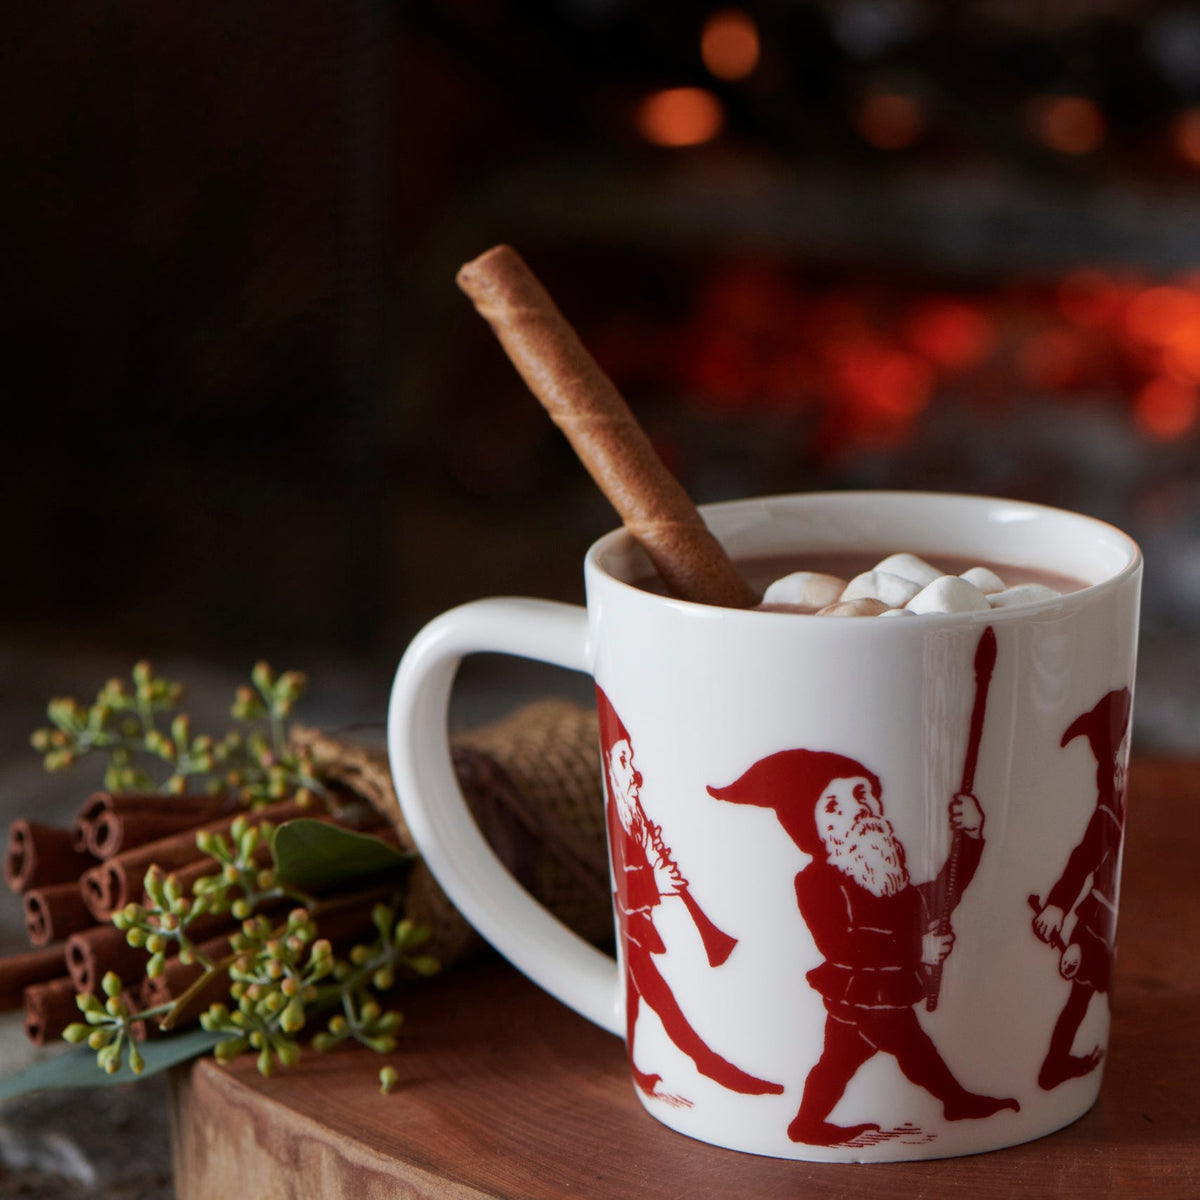 A Holiday Mugs Mixed Set of 12 filled with hot chocolate and adorned with a cinnamon stick, perfect for the holiday season, created by Caskata.